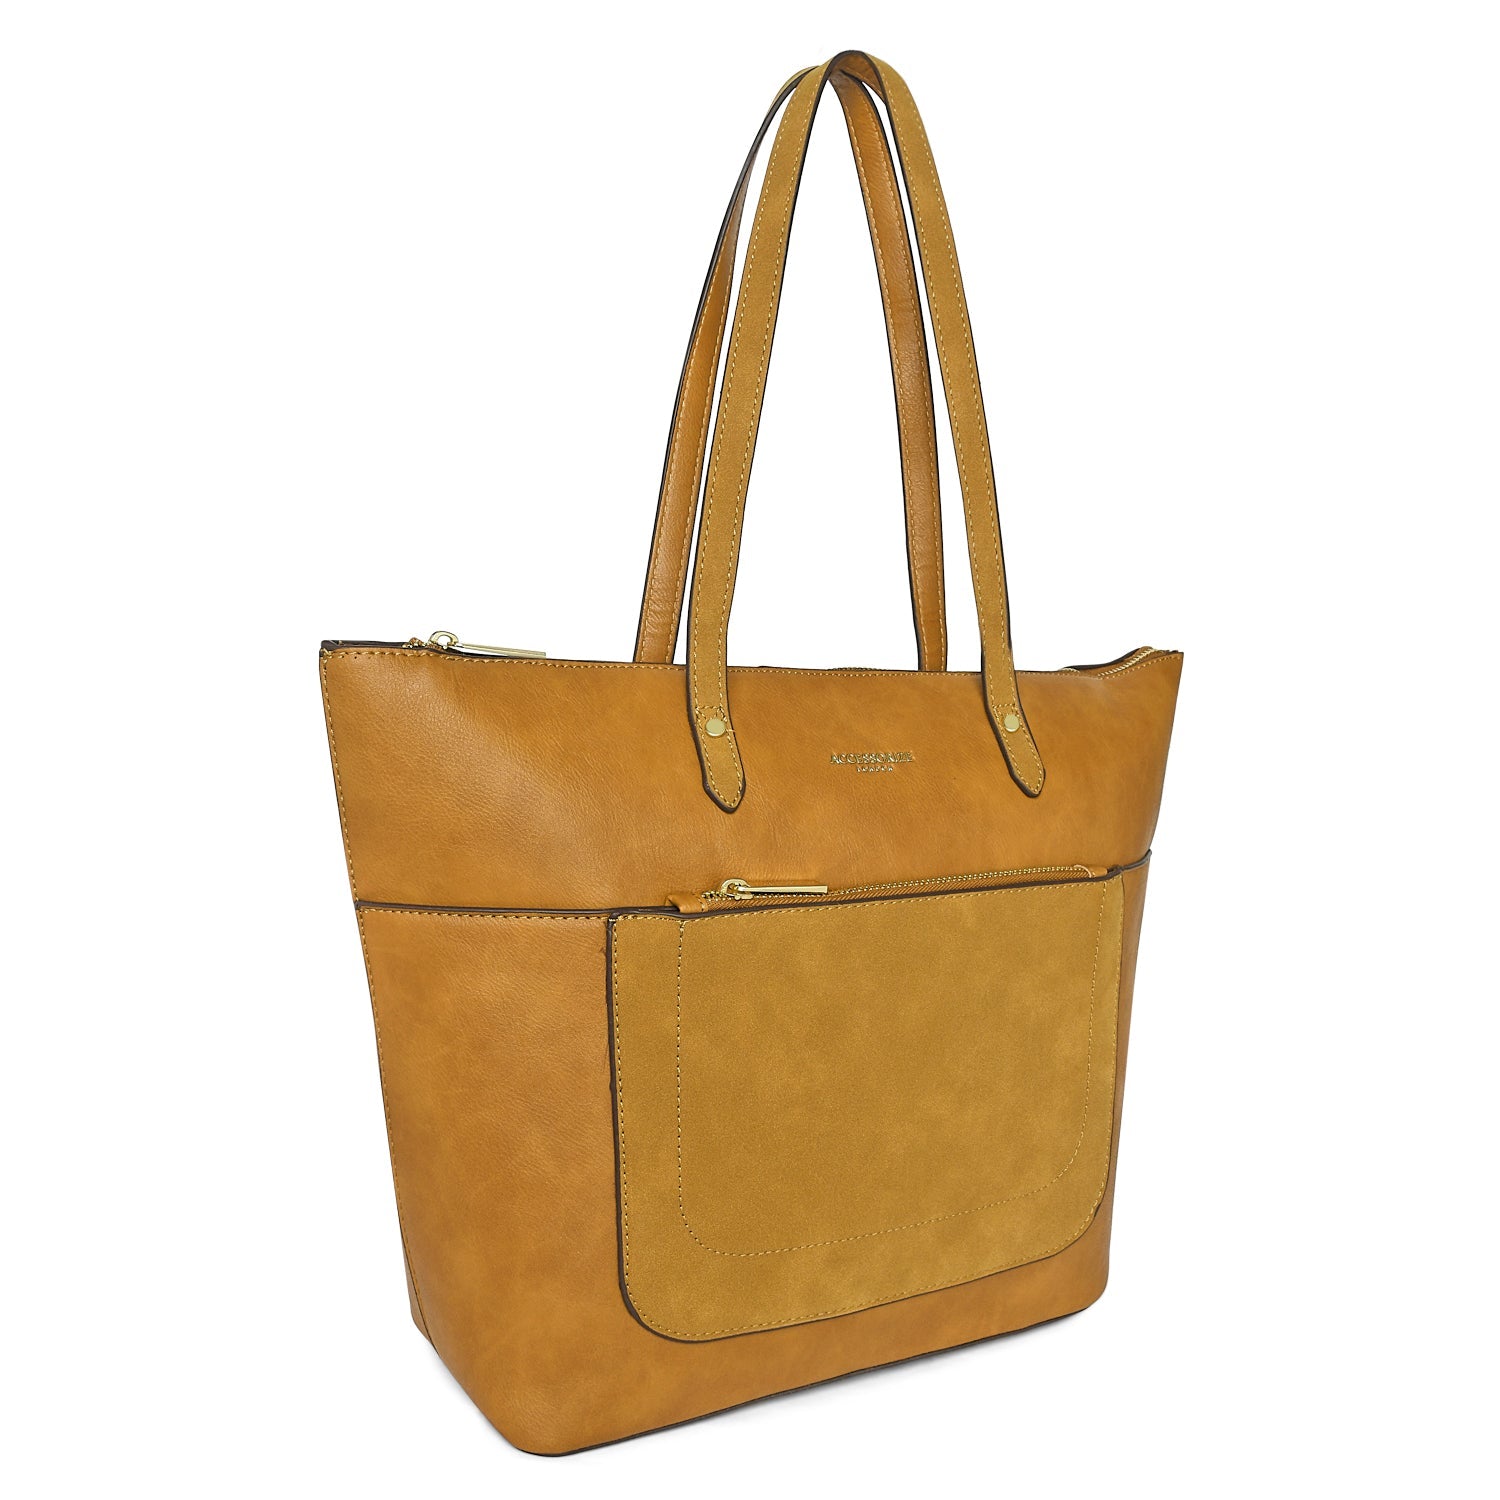 Accessorize London Women's Faux Leather Yellow Spacious Emily Tote Bag